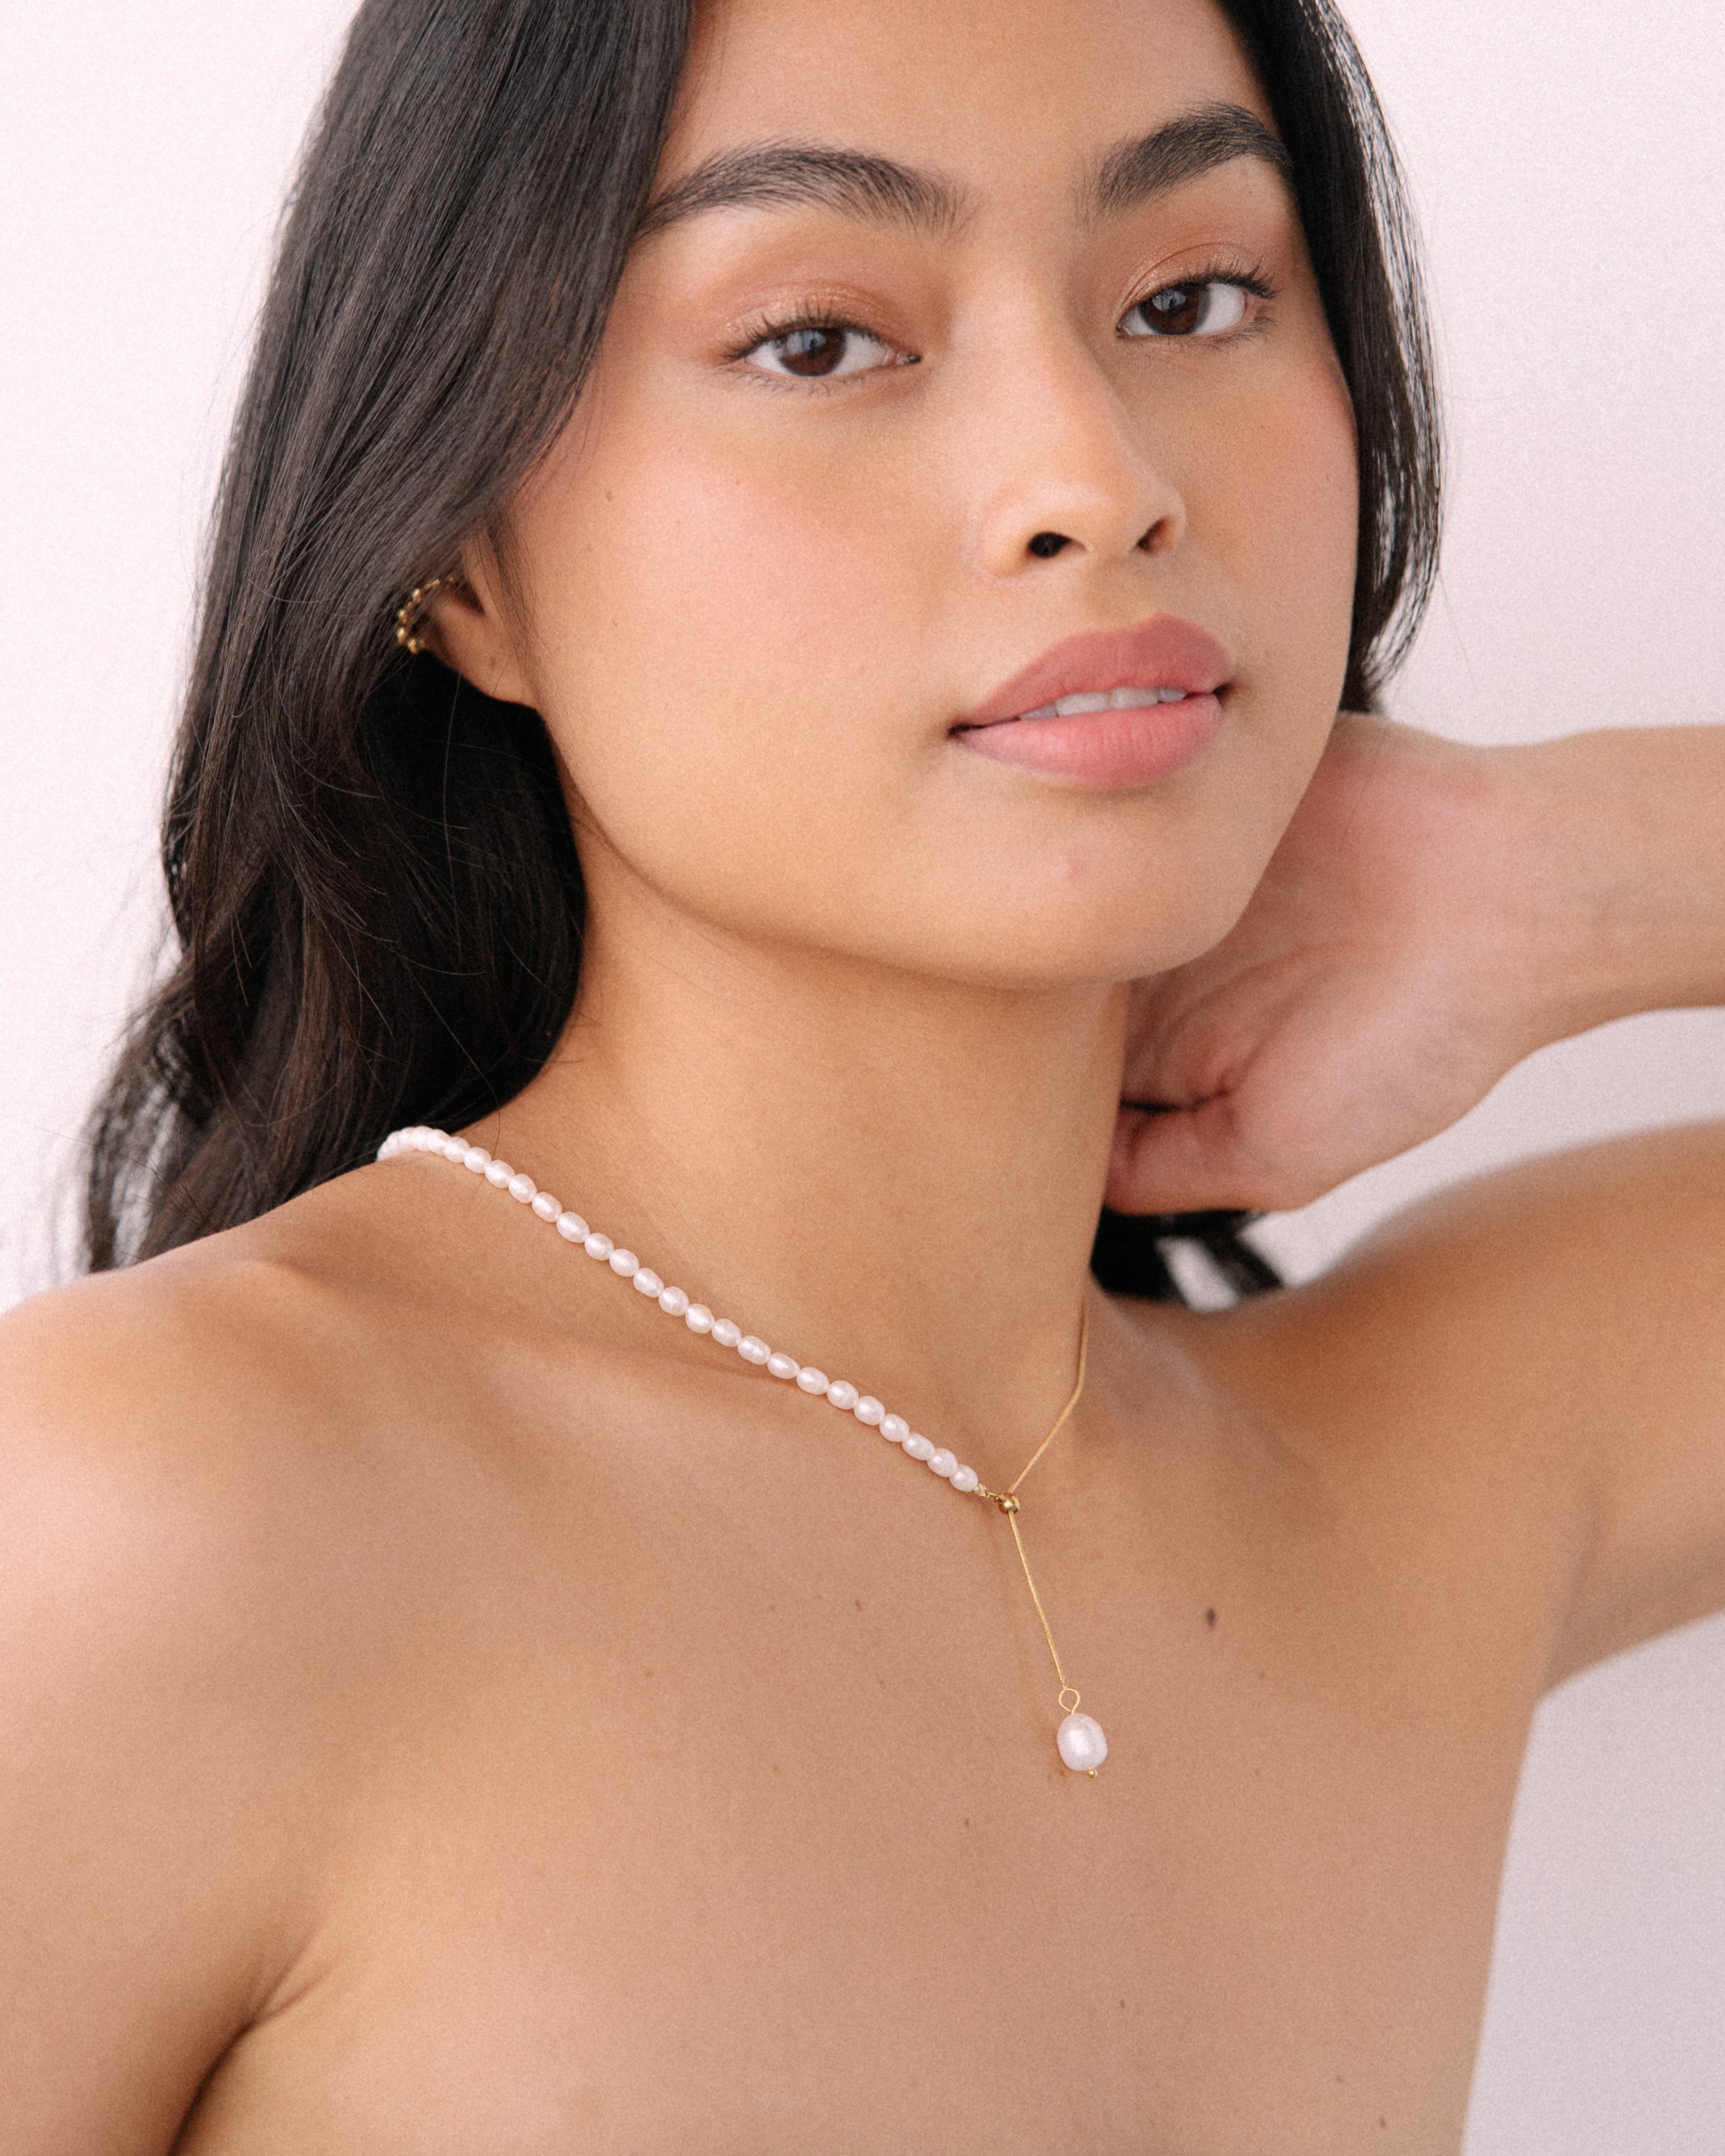 The half pearl necklace